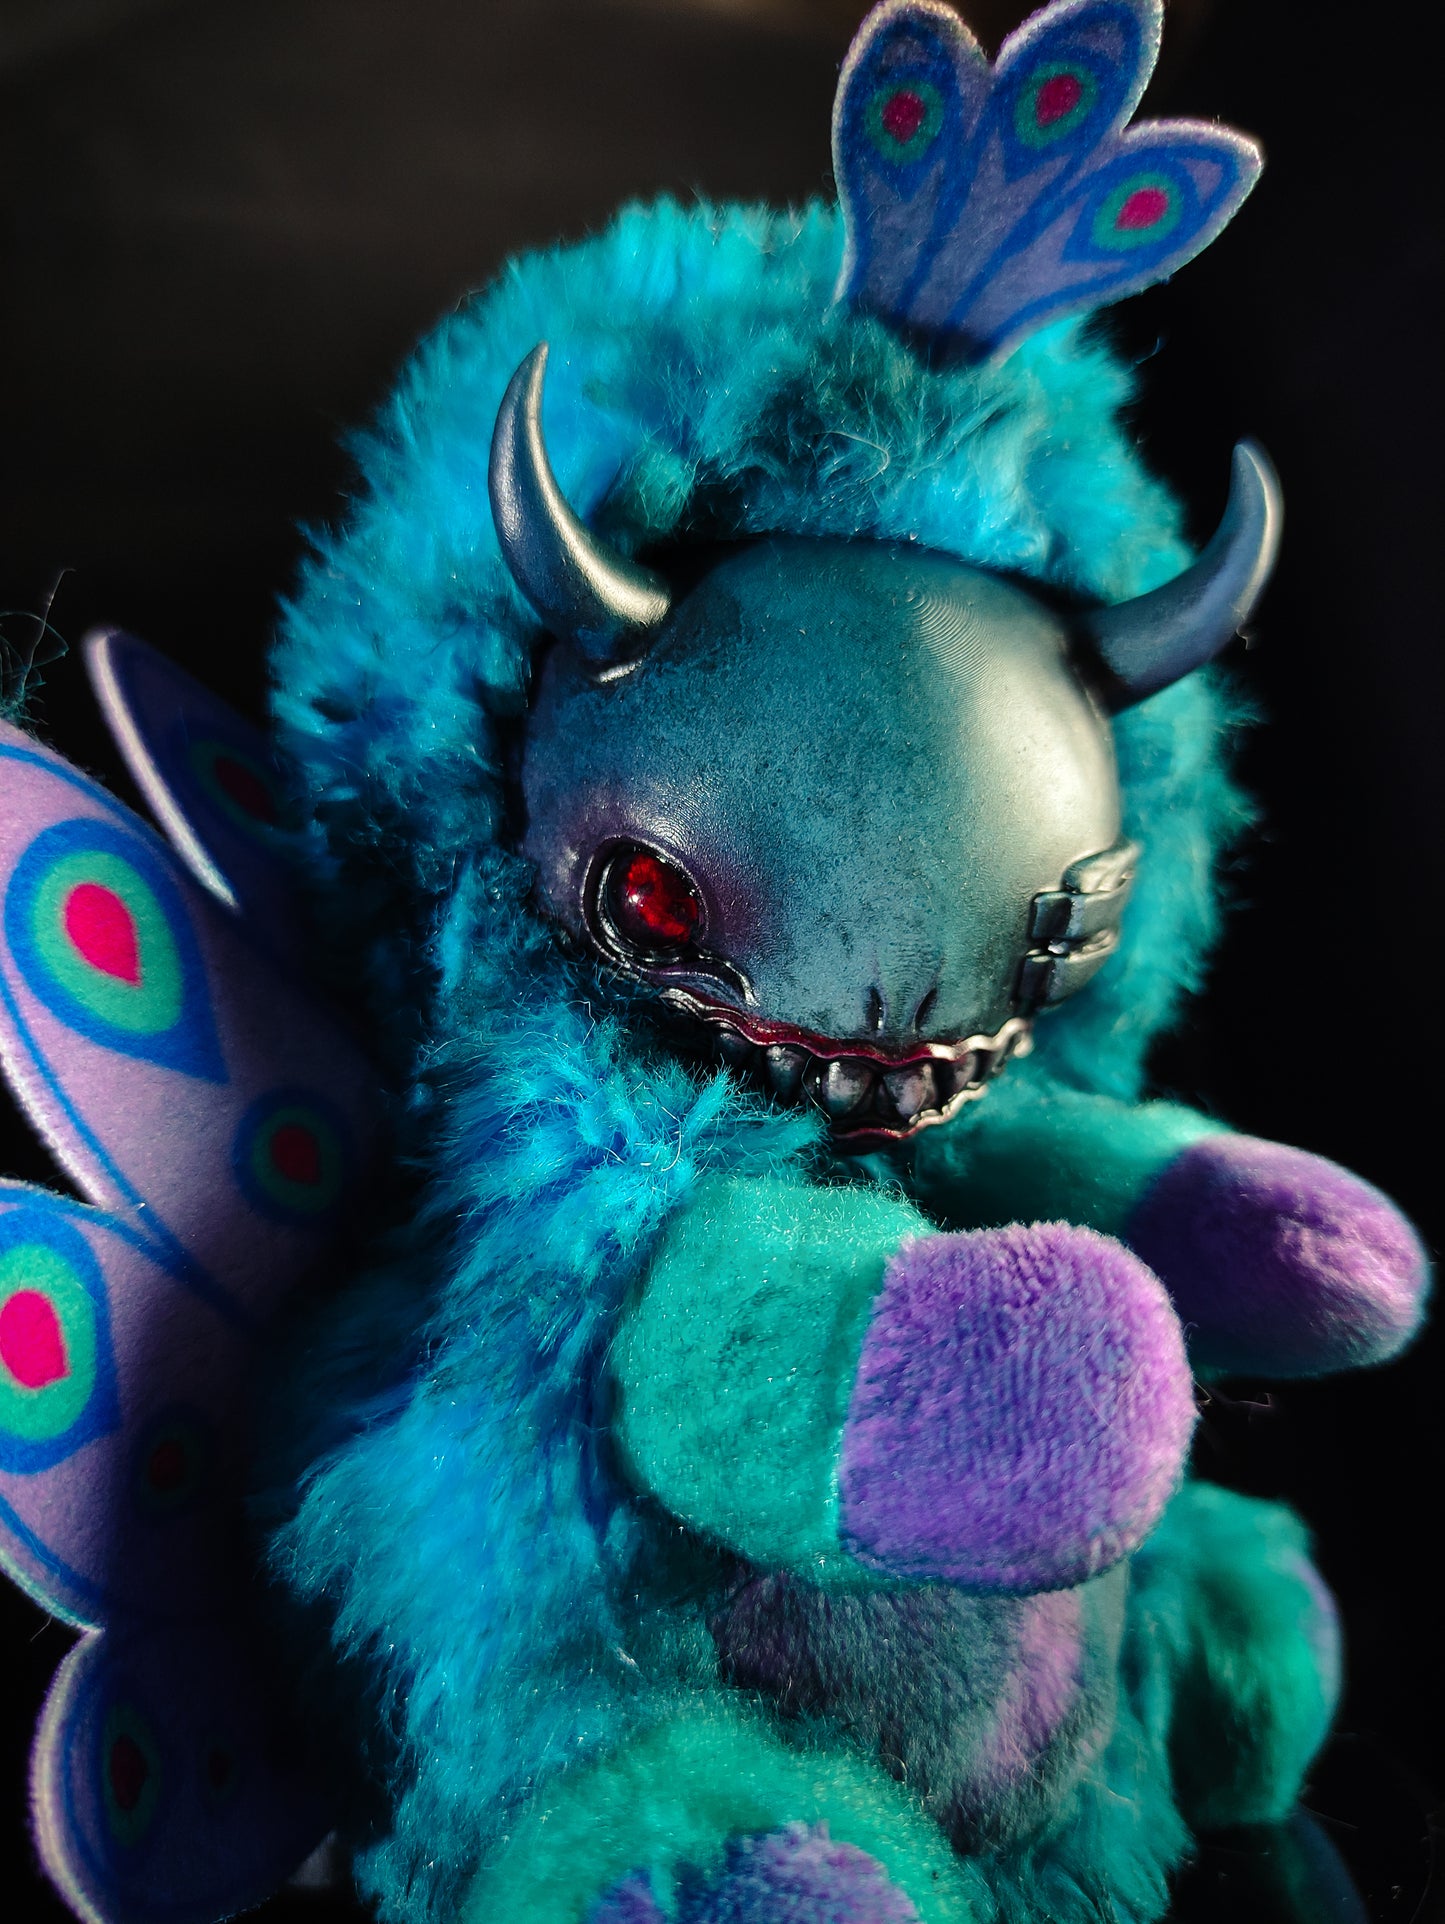 FRIEND Devilish Candy Flavour - Cryptid Art Doll Plush Toy